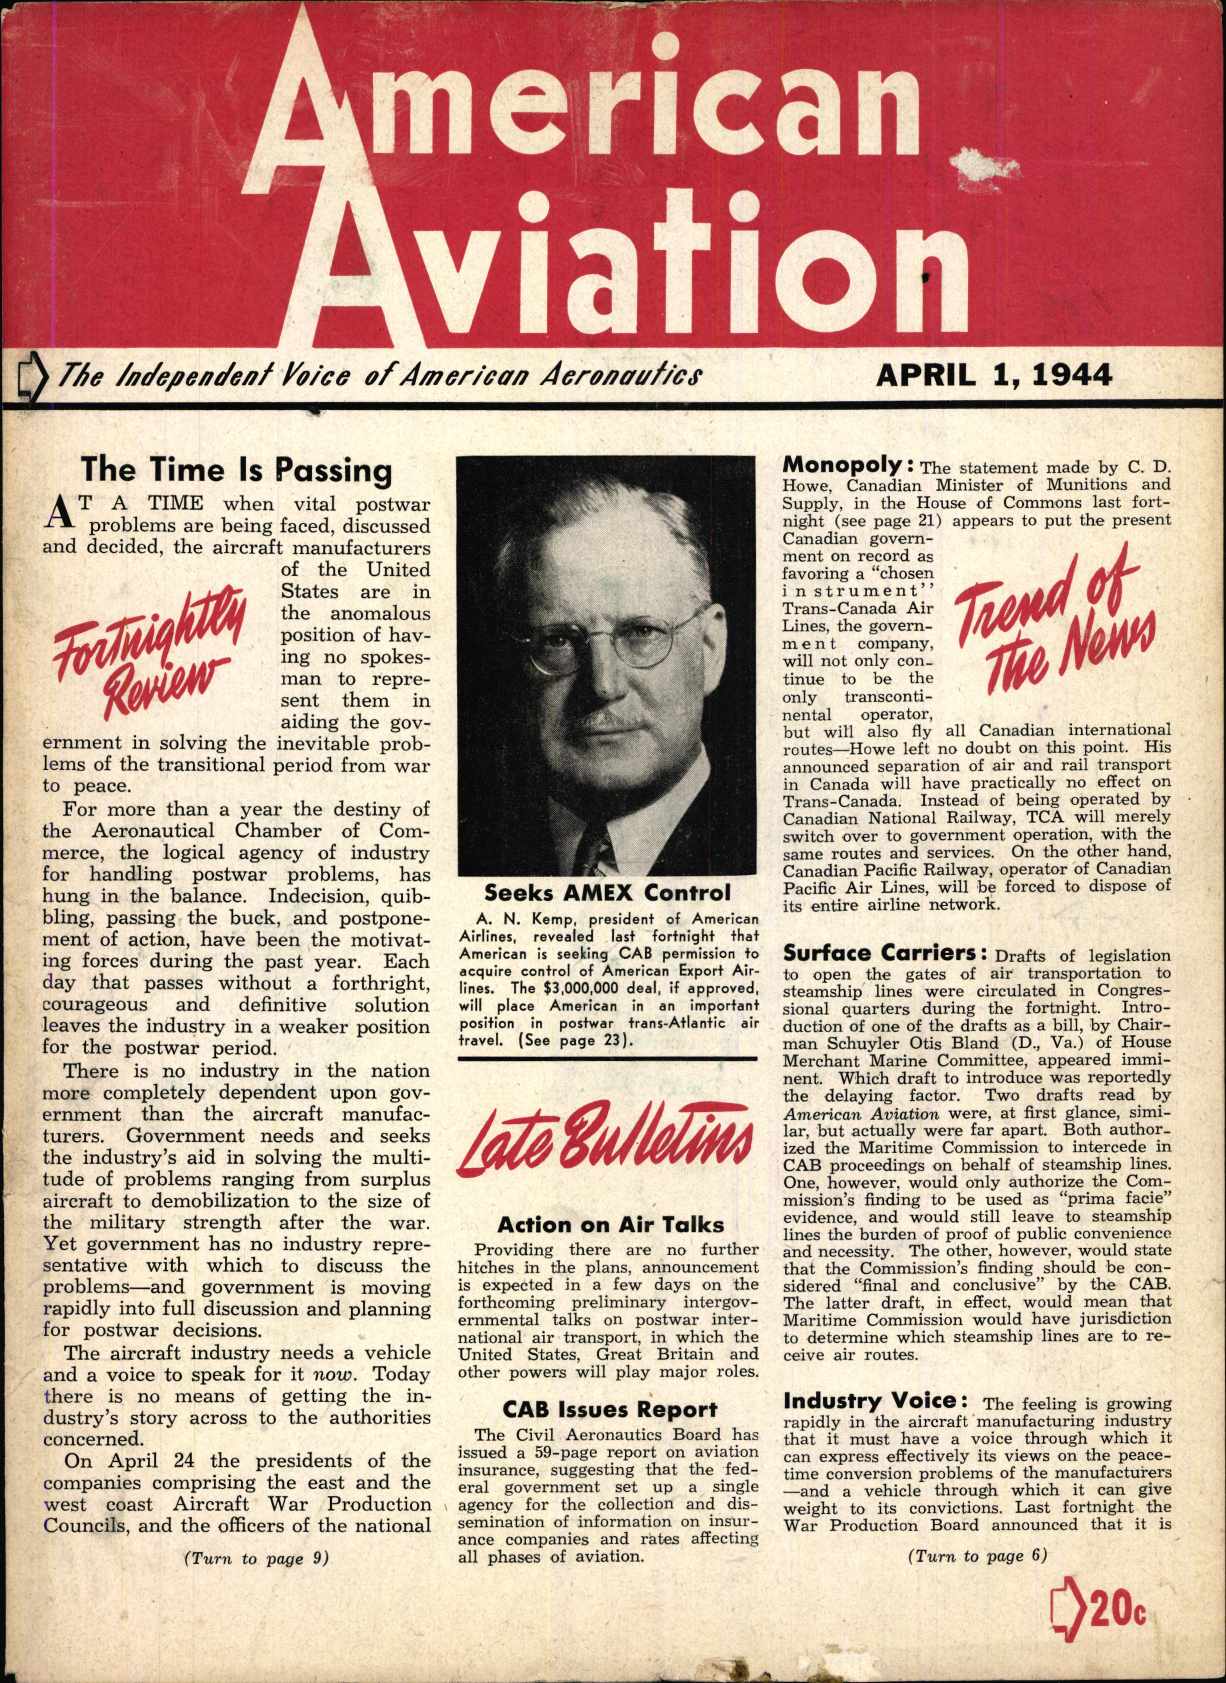 Sample page 1 from AirCorps Library document: American Aviation Magazine - Volume 7 - No. 21